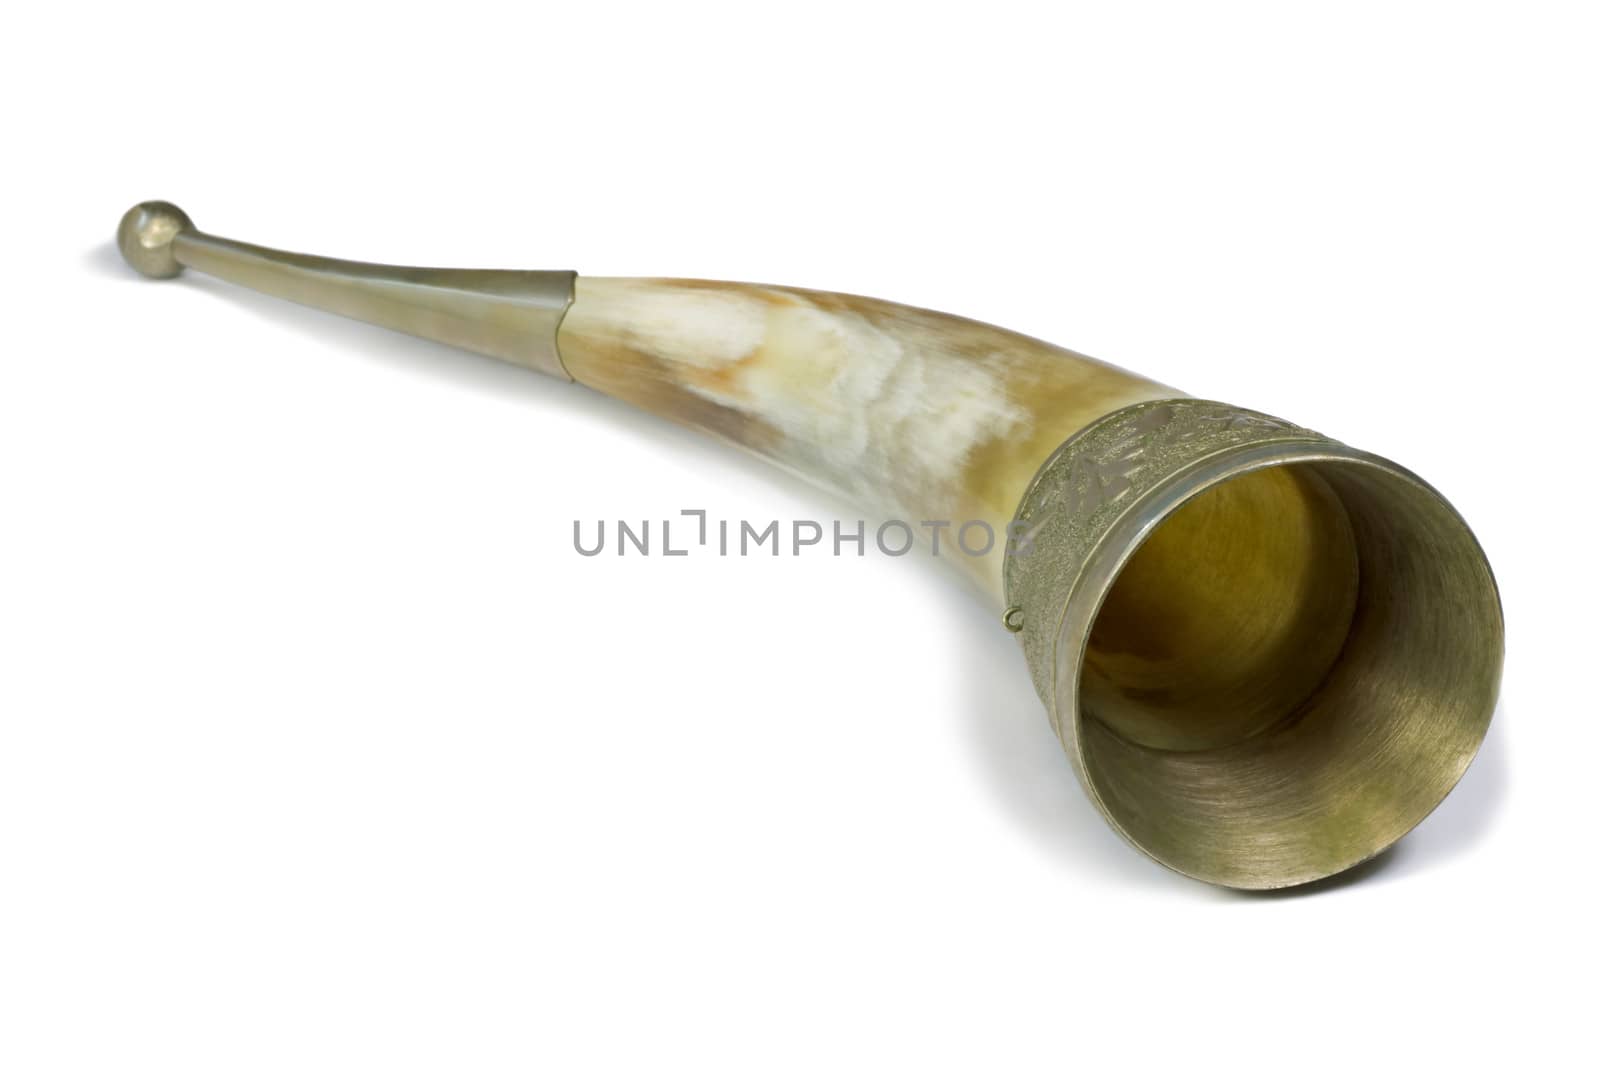 Cup for wine, made from animal horns, on a white background. by georgina198